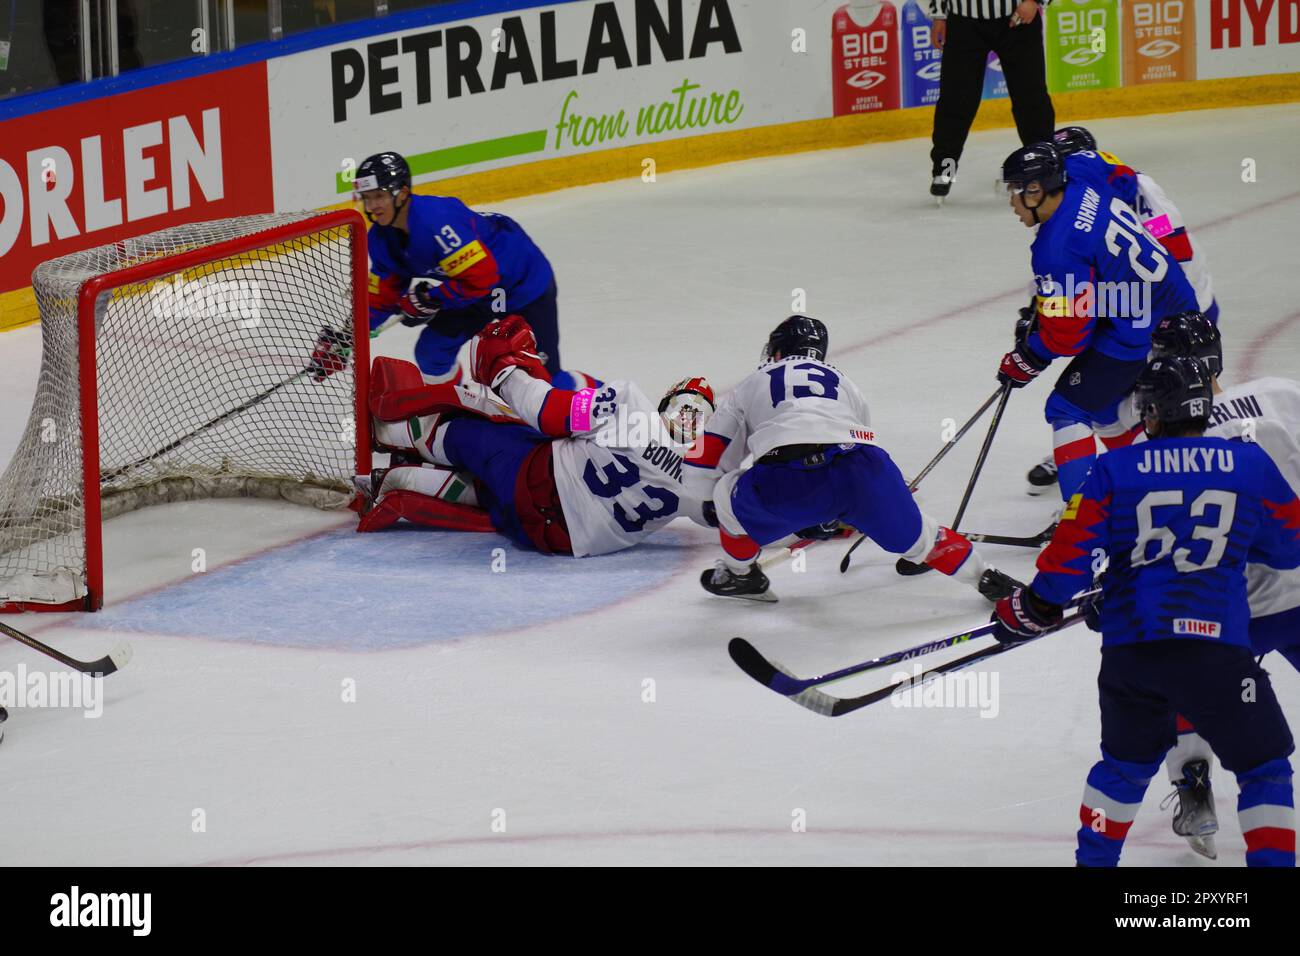 Nottingham, 29 April 2023. Action in front of the Great Britain goal during their game against Korea in the 2023 IIHF Ice Hockey World Championship, Division I, Group A tournament at the Motorpoint Arena, Nottingham. Credit: Colin Edwards Stock Photo